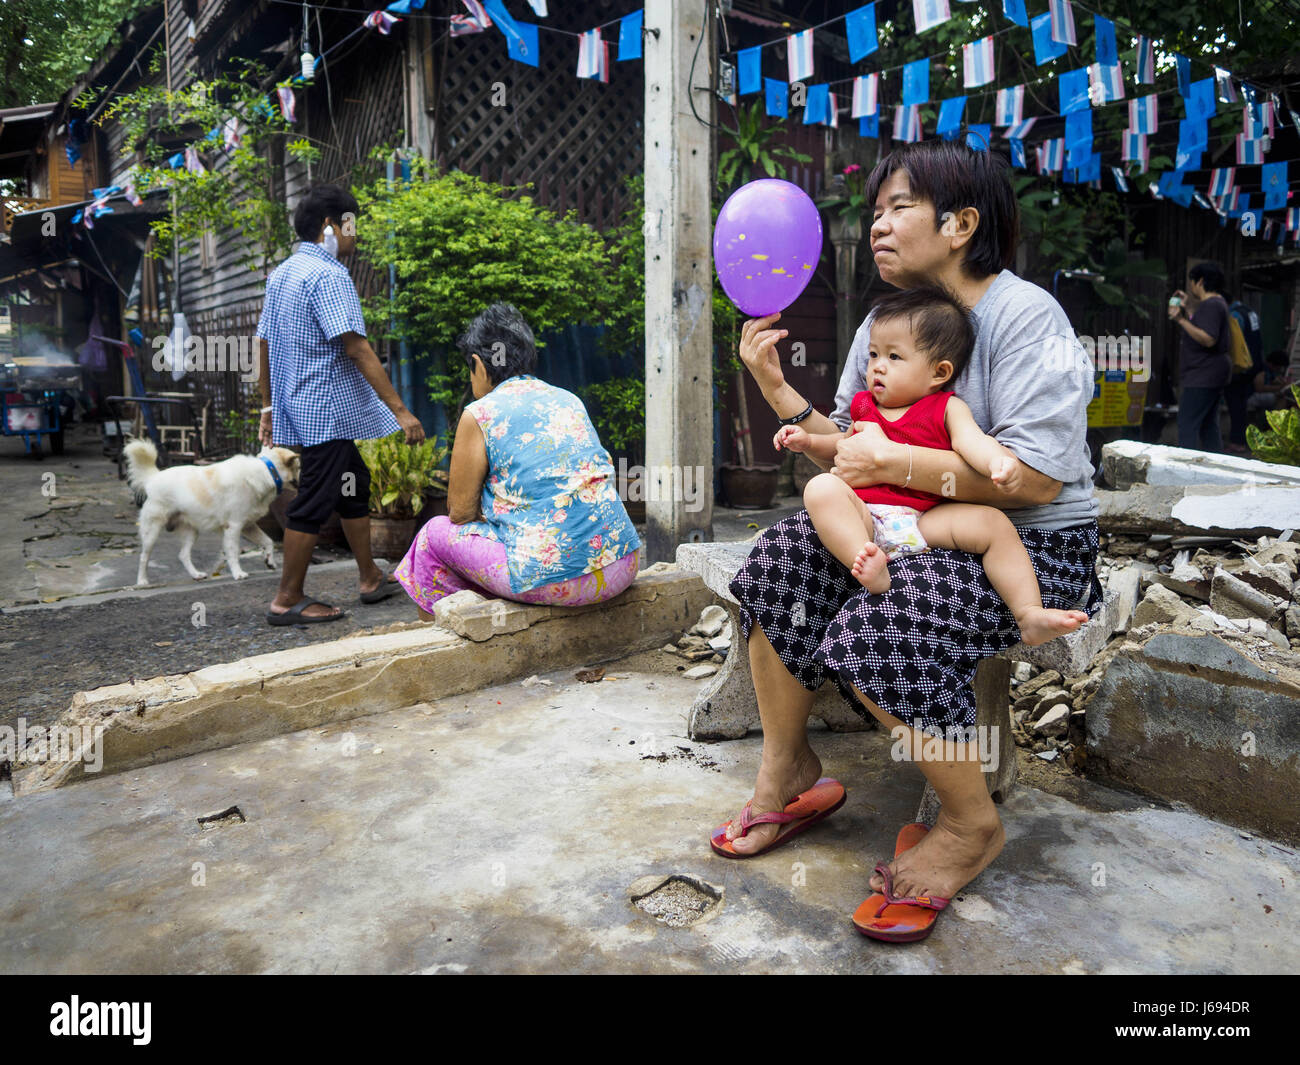 May 16, 2017 - Bangkok, Bangkok, Thailand - A woman and her grandson sit in what used to be a home and is now an empty lot in Pom Mahakan. The city evicted the family living in the home and tore it down. The final evictions of the remaining families in Pom Mahakan, a slum community in a 19th century fort in Bangkok, have started. City officials are moving the residents out of the fort. NGOs and historic preservation organizations protested the city's action but city officials did not relent and started evicting the remaining families in early March. (Credit Image: © Jack Kurtz via ZUMA Wire) Stock Photo